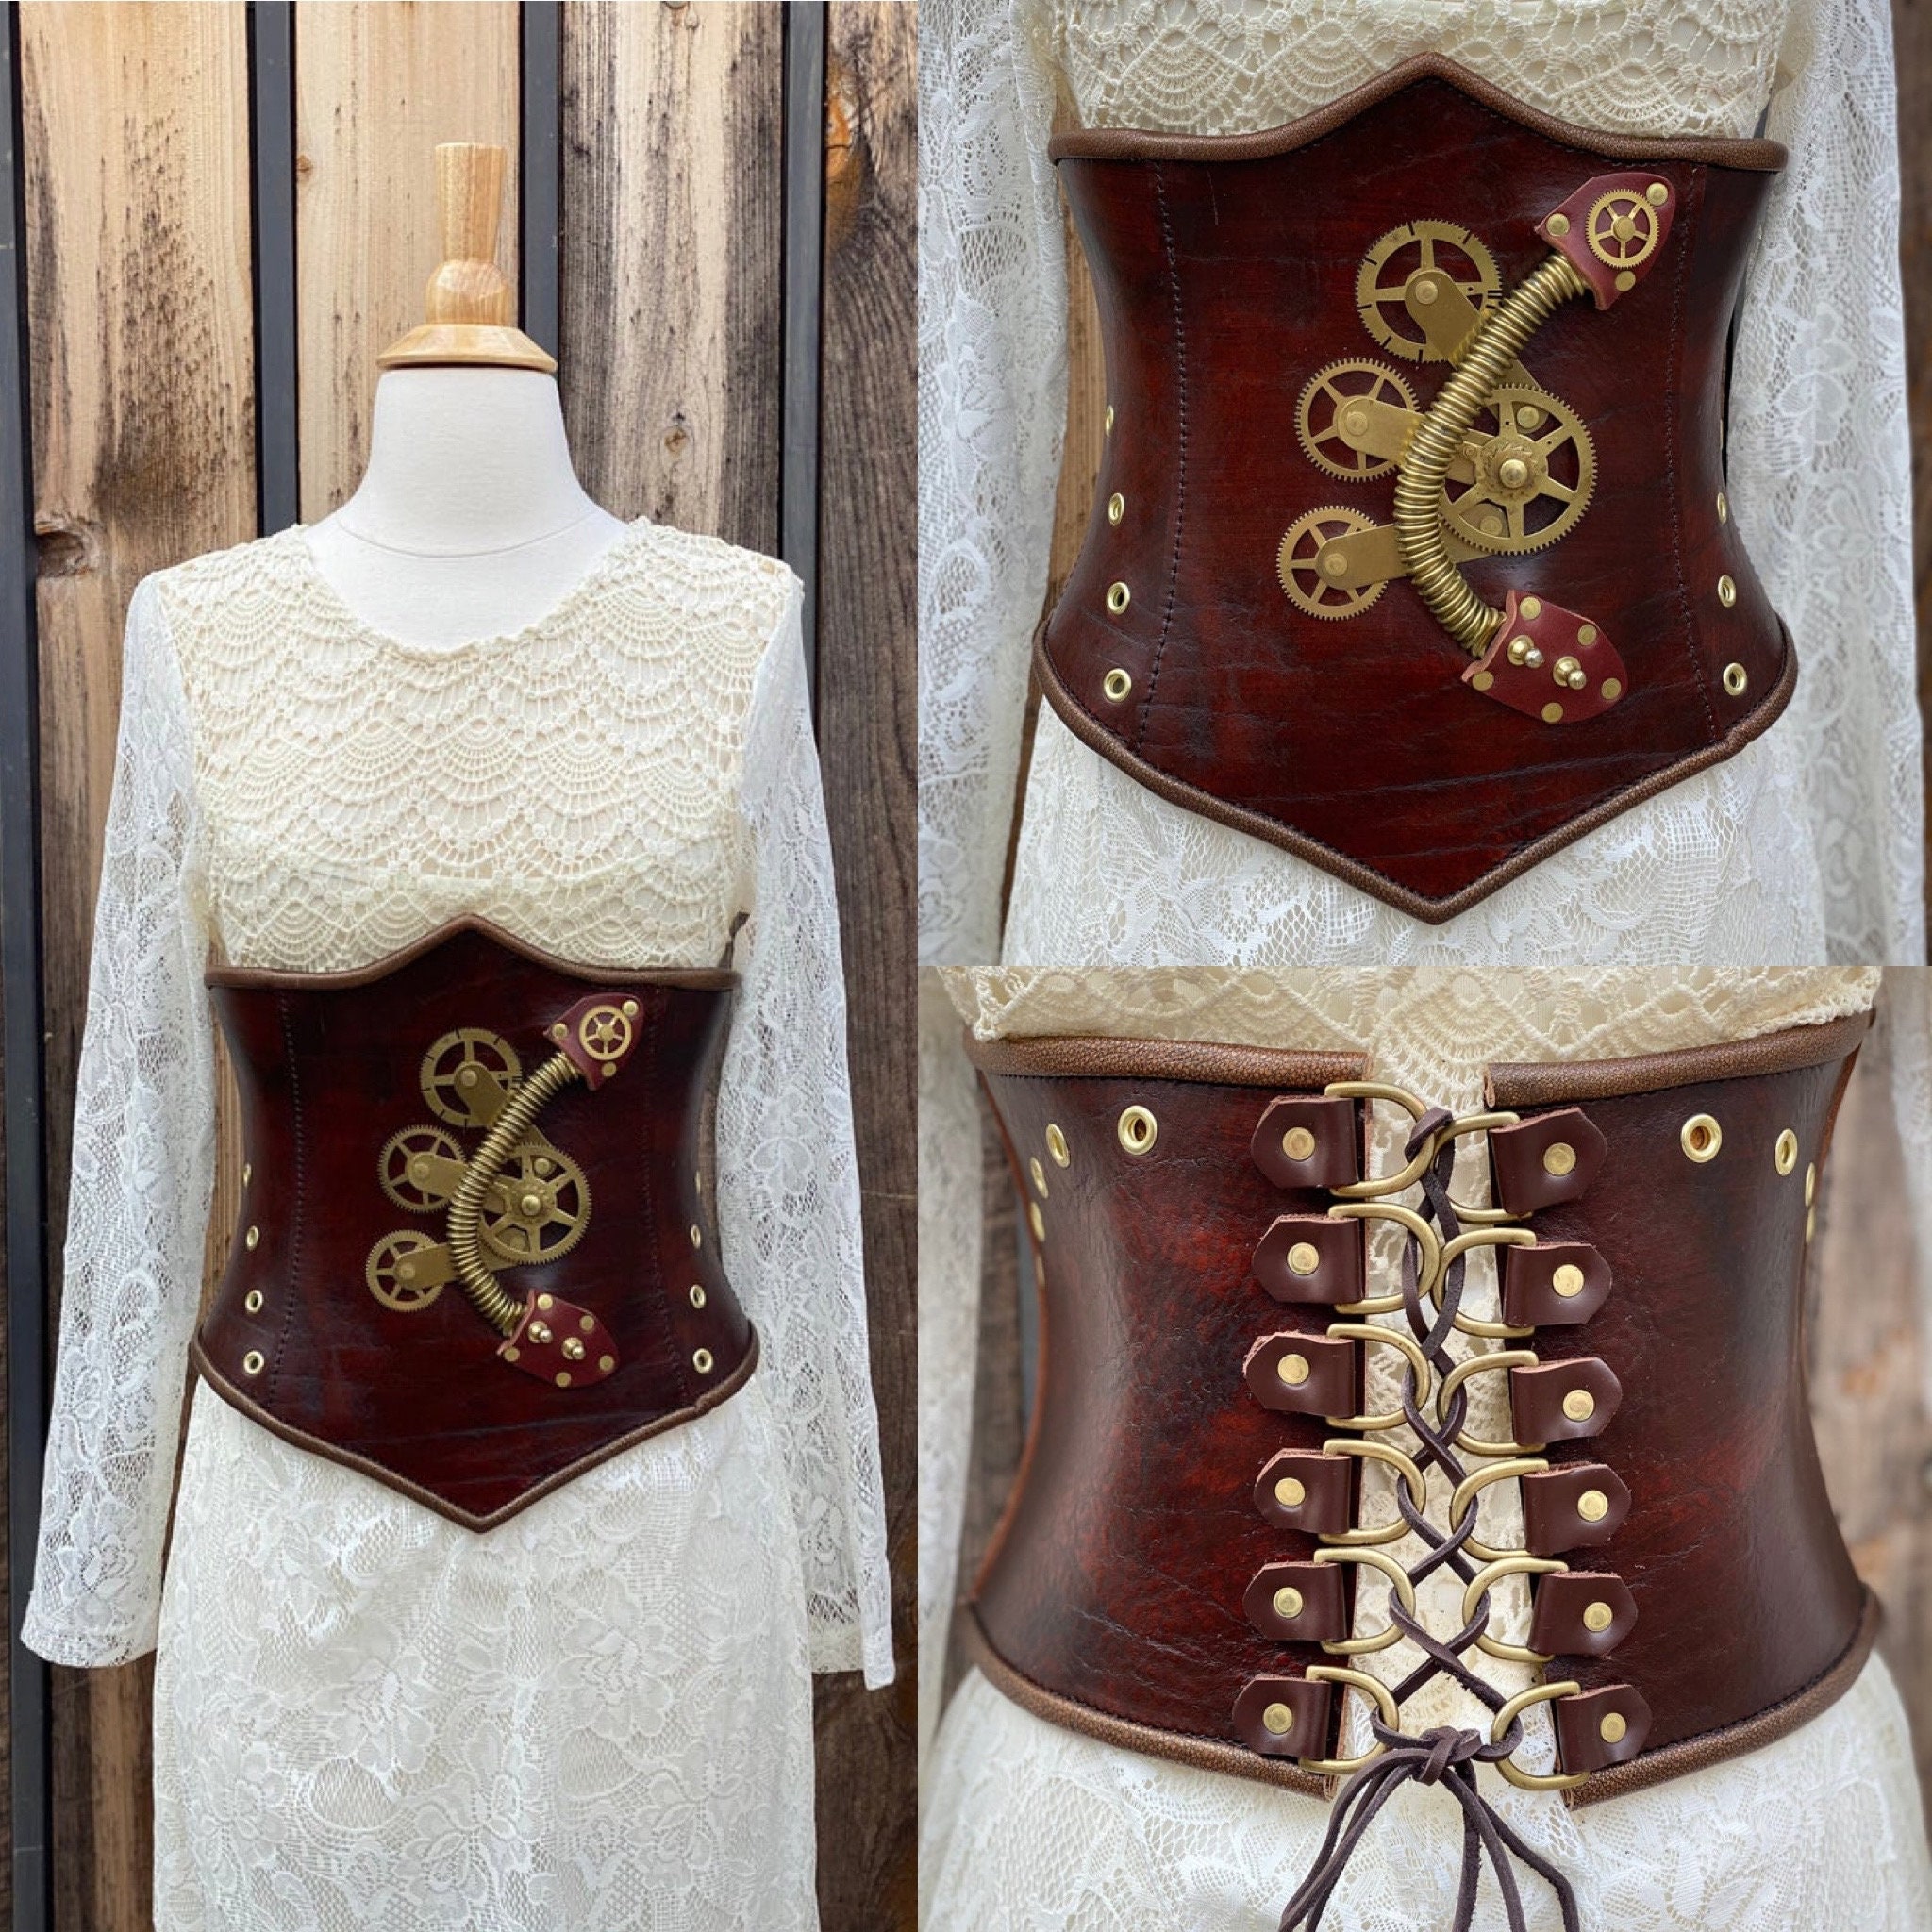 SALE Vtg Steampunk Leather Custom Made Underbust Corset Laces Up Back